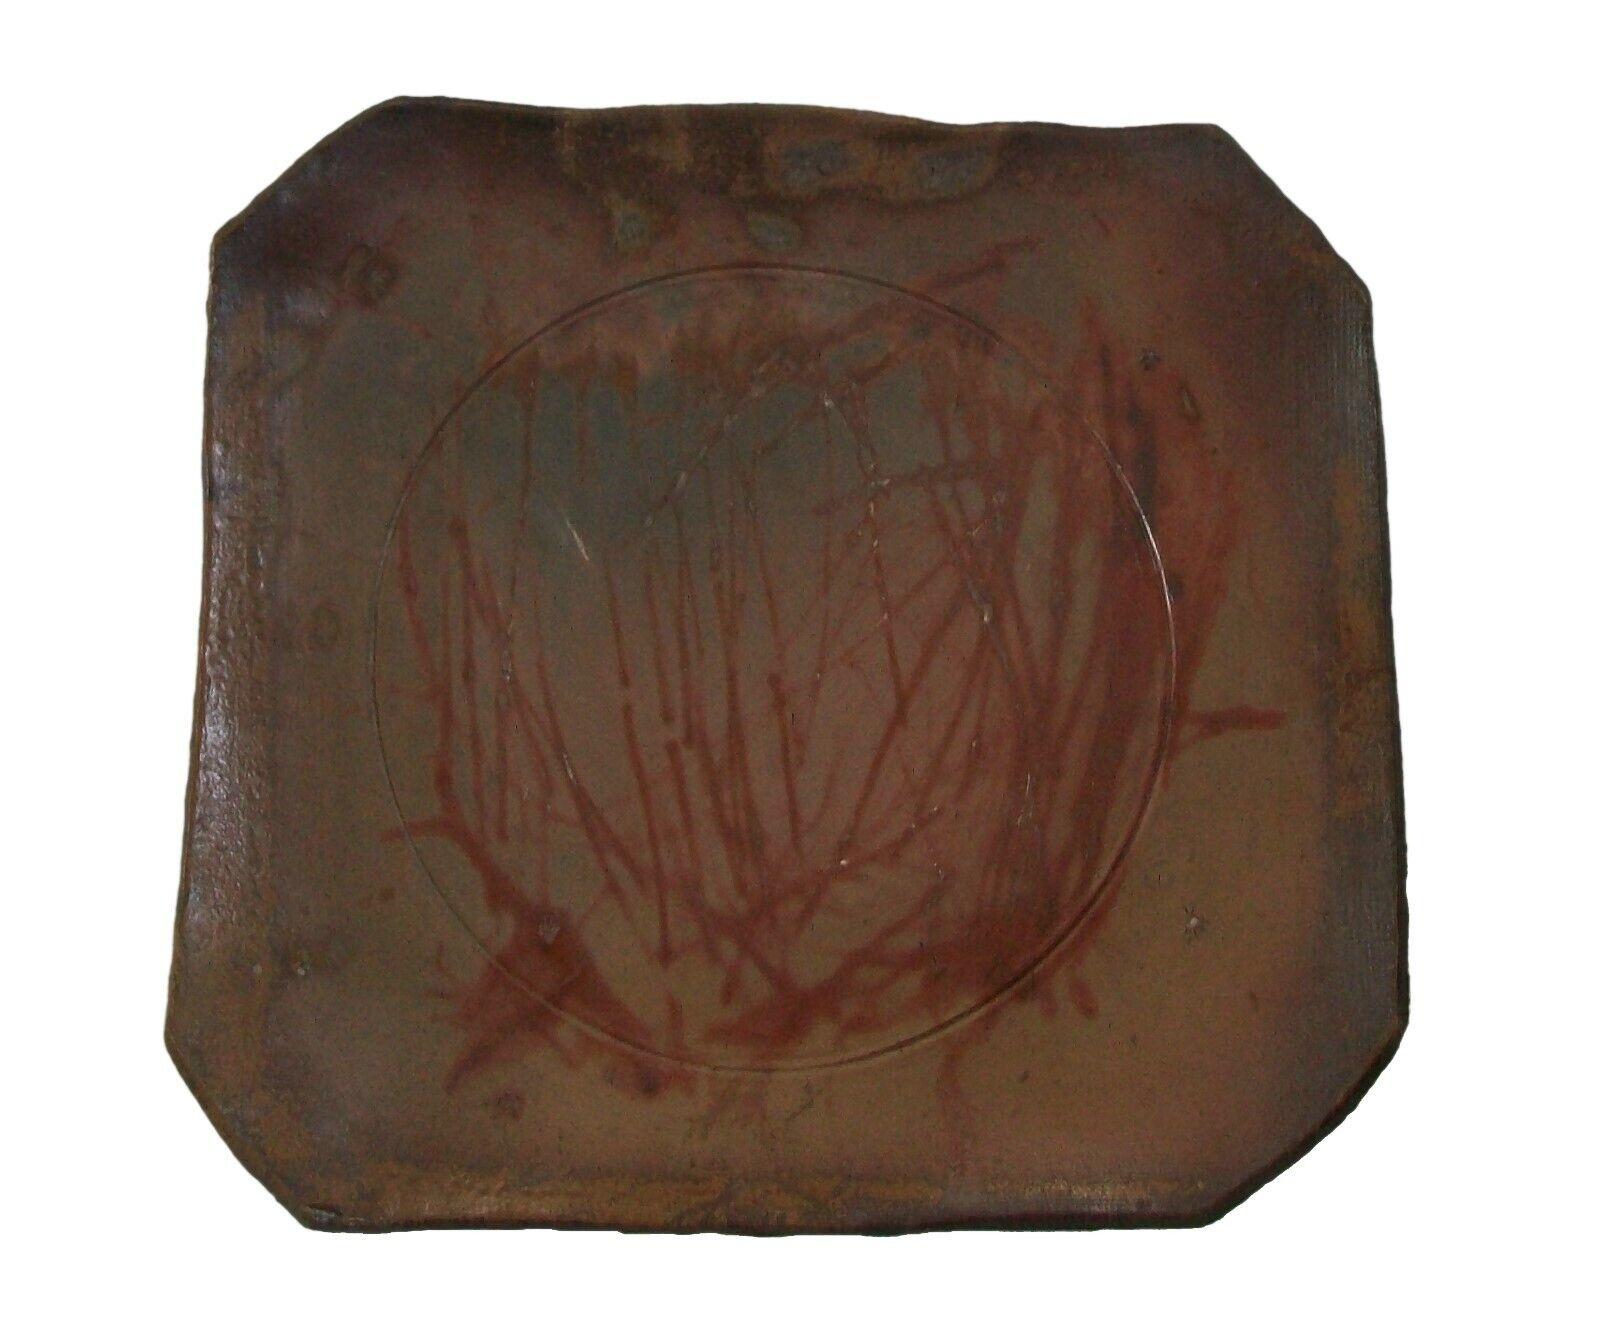 Hand-Crafted Bizen Ware Wood Fired Charger, Original Box, Signed, Japan, Late 20th C. For Sale